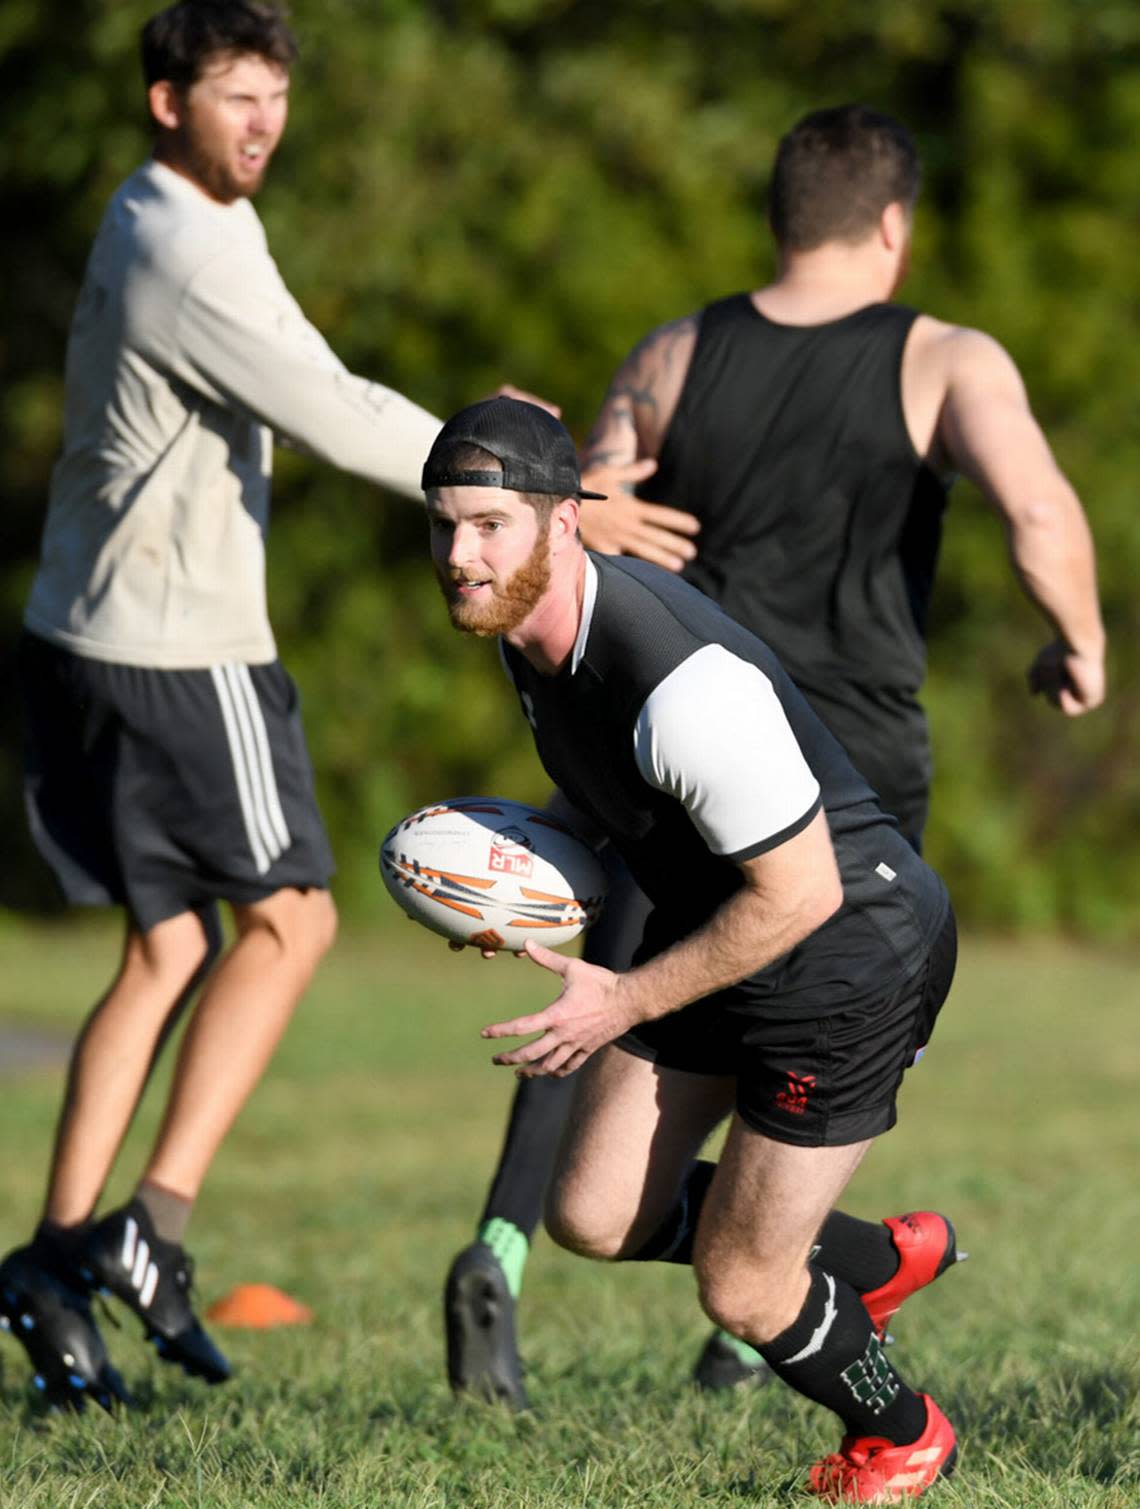 Rugby club organizer and celebrated player on both U.S. and European squads, Alex MacDonald is taking up the rugby mantle from clubs of the past on Hilton Head. The club was last active in 2017 but MacDonald hopes to rekindle the rugby spark in 2023. Robert York